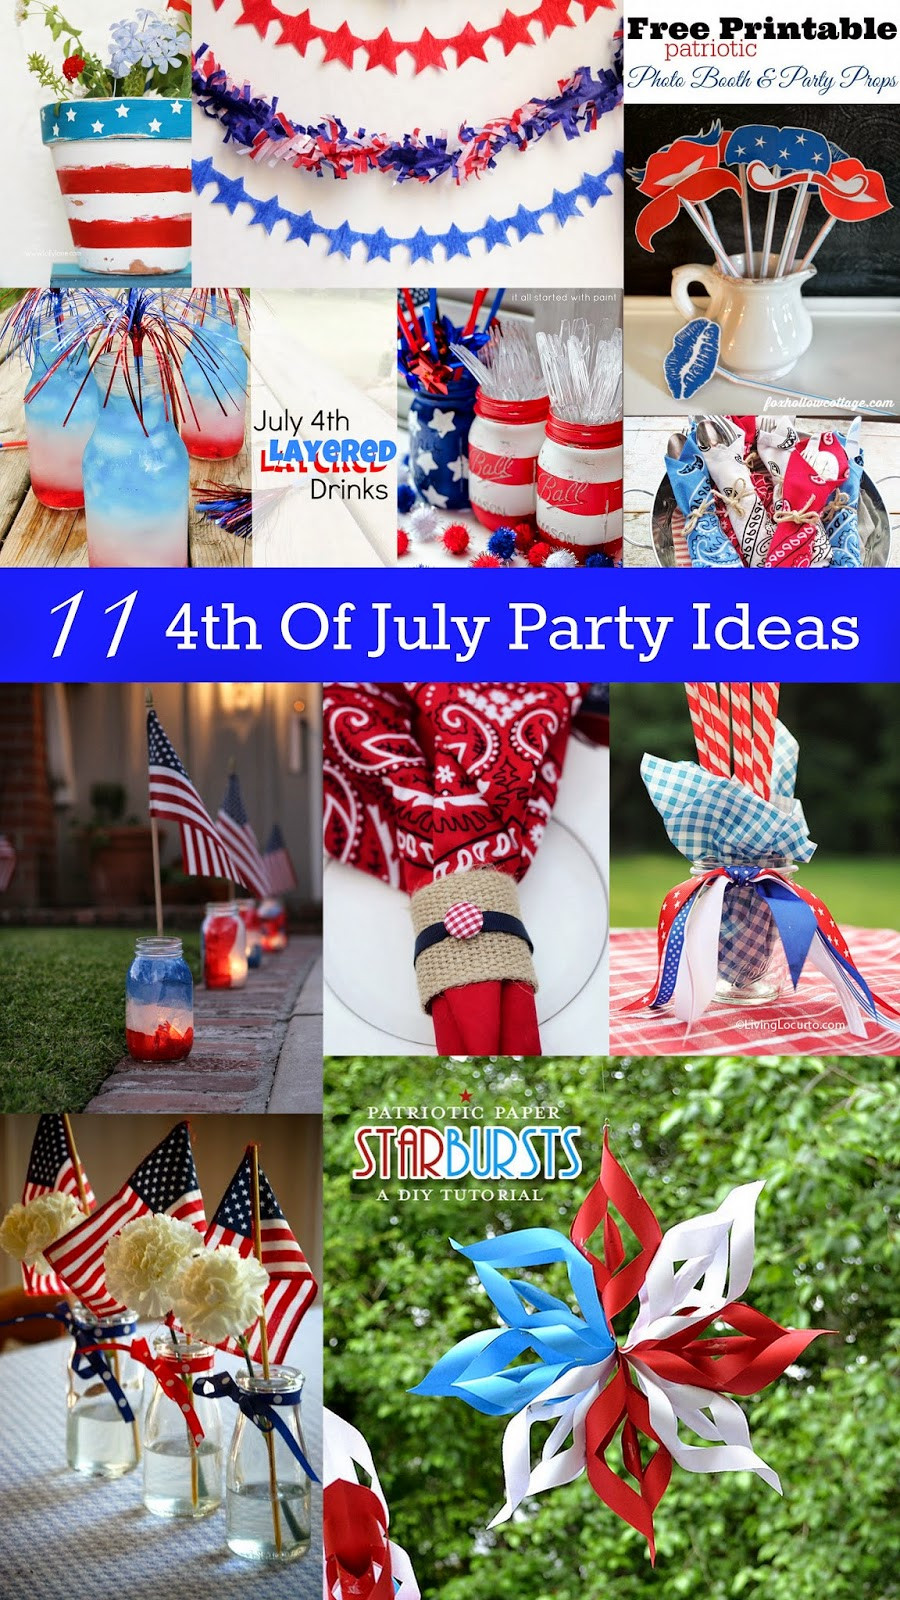 4th Of July Celebration Ideas
 Housewife Eclectic 11 4th of July Party Ideas